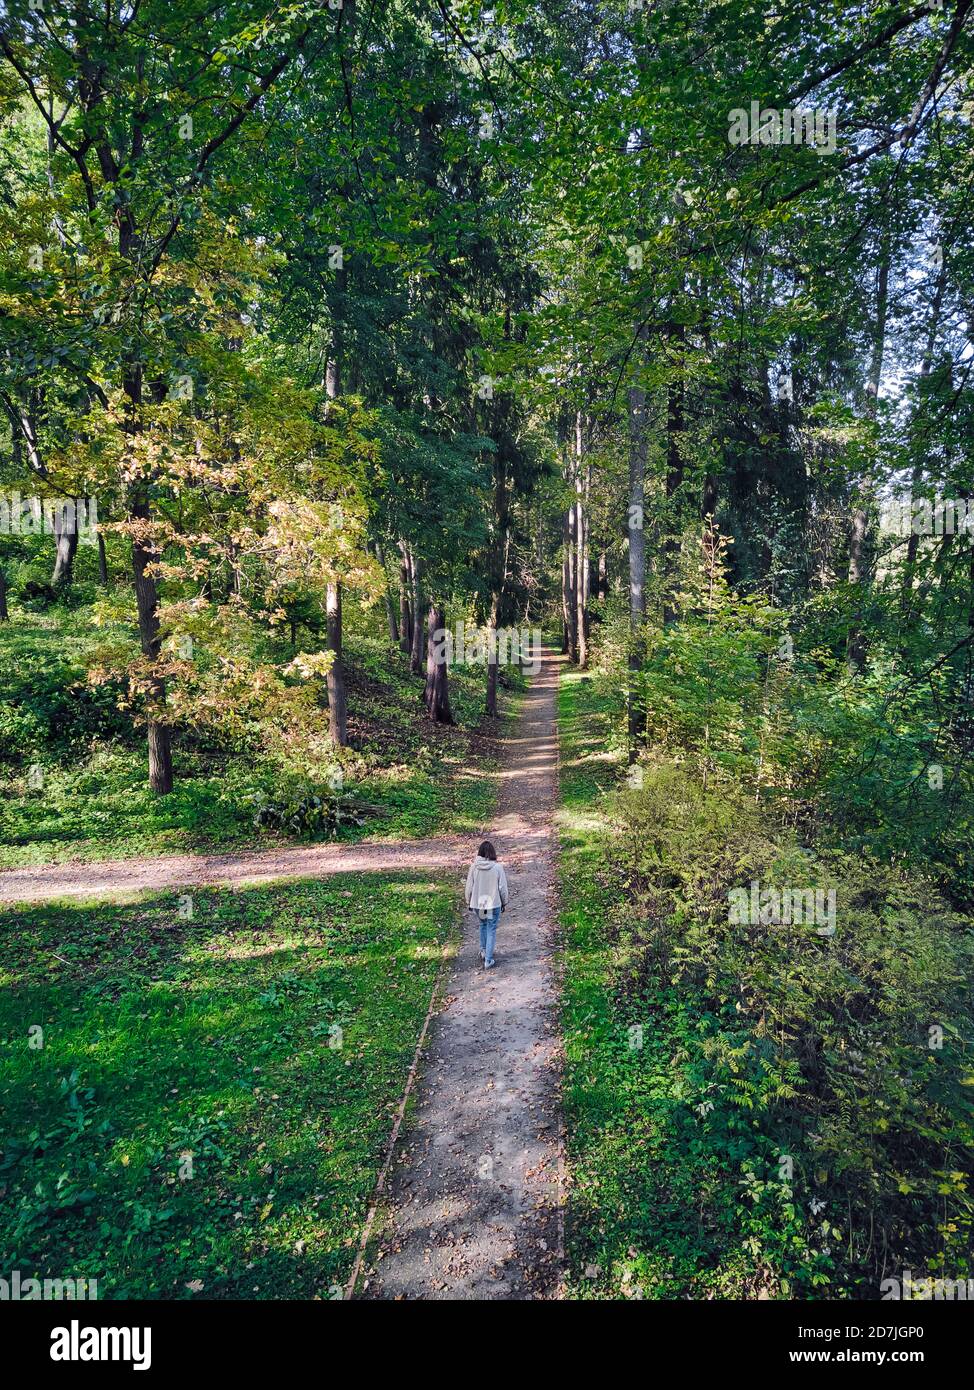 Woman walking on footpath amidst trees in park Stock Photo